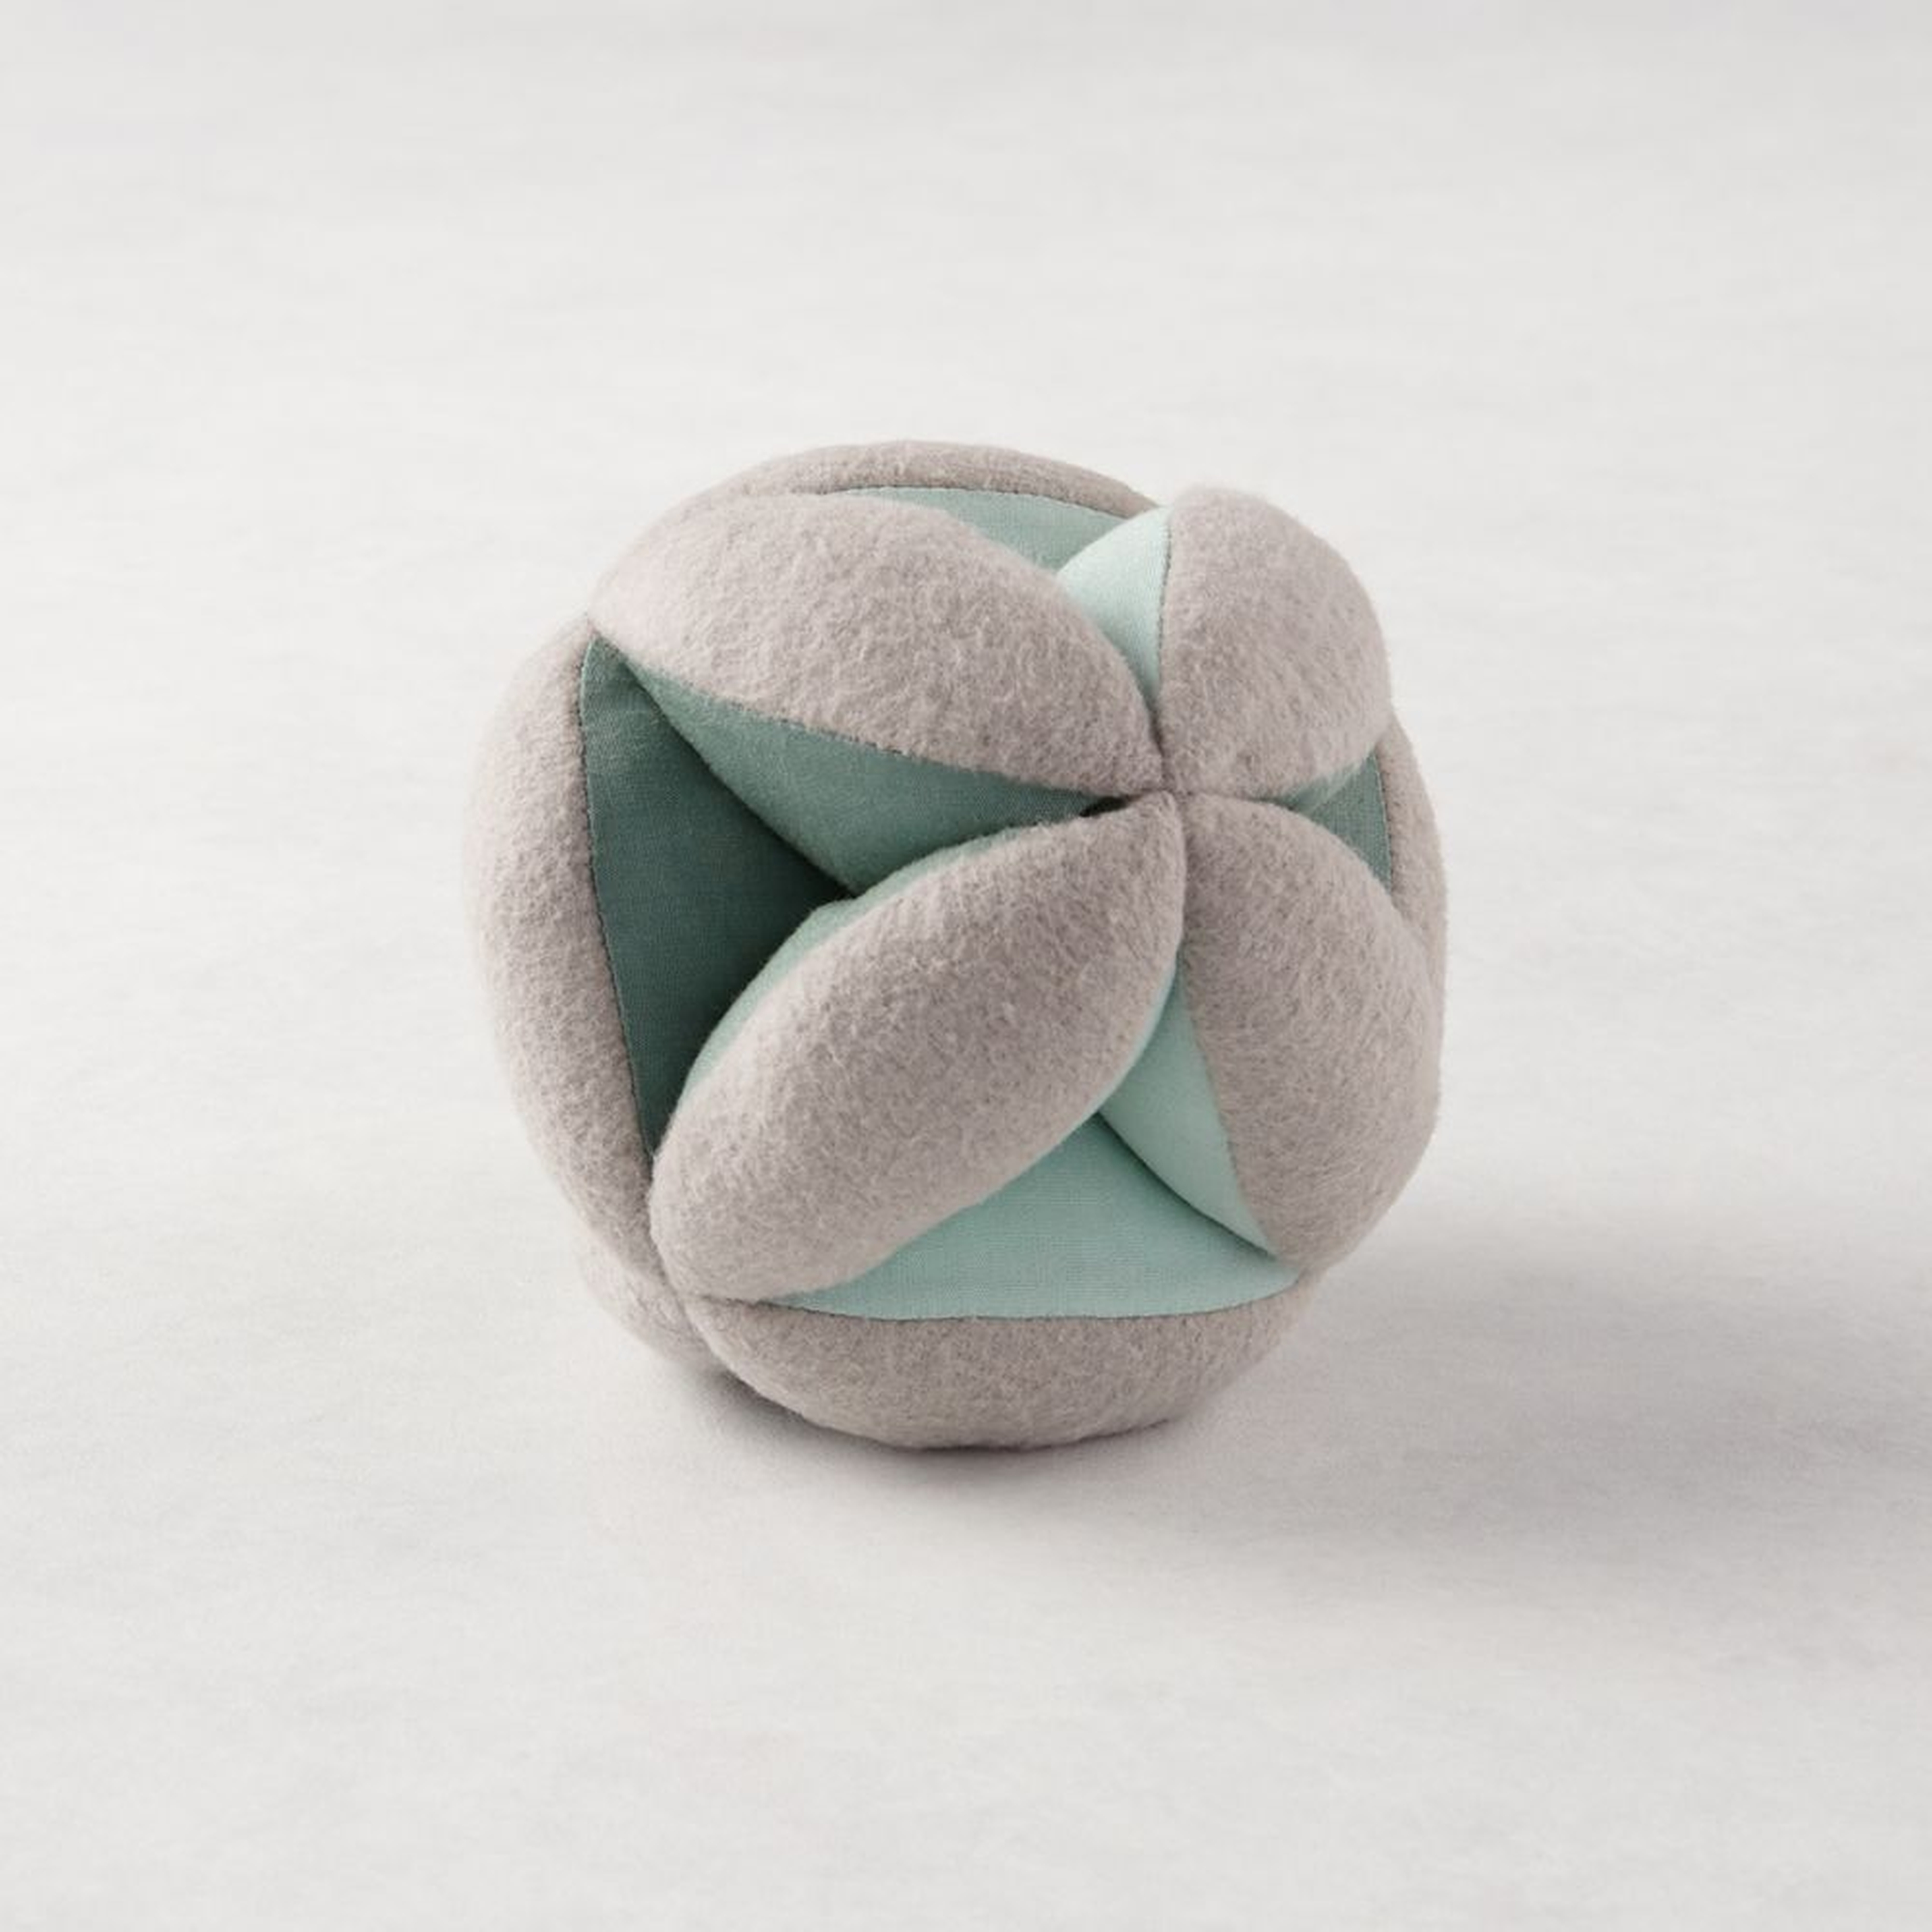 Teal Baby Plush Ball Rattle - Crate and Barrel